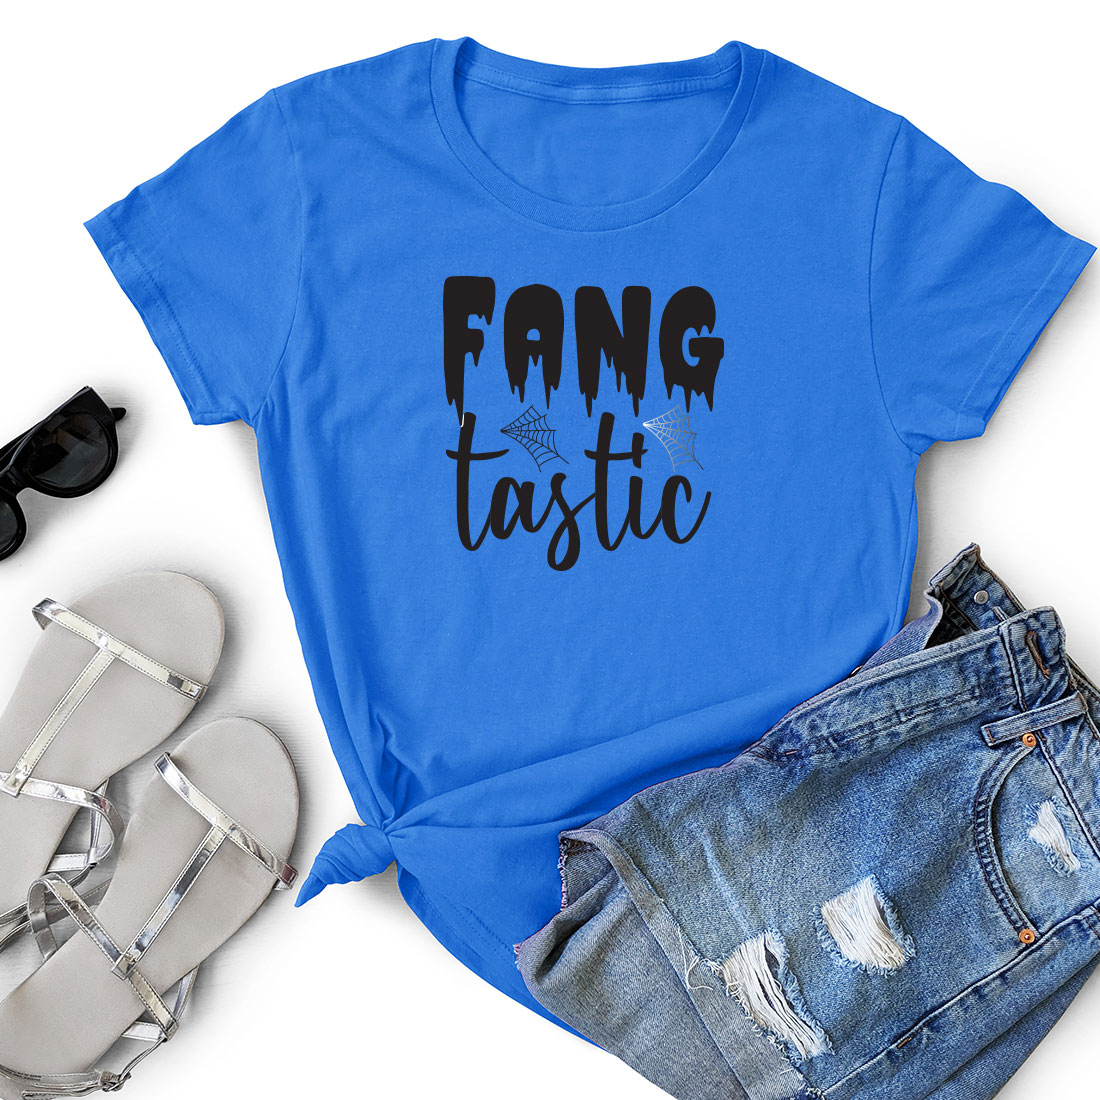 Blue t - shirt that says fangg tastic next to a pair of.